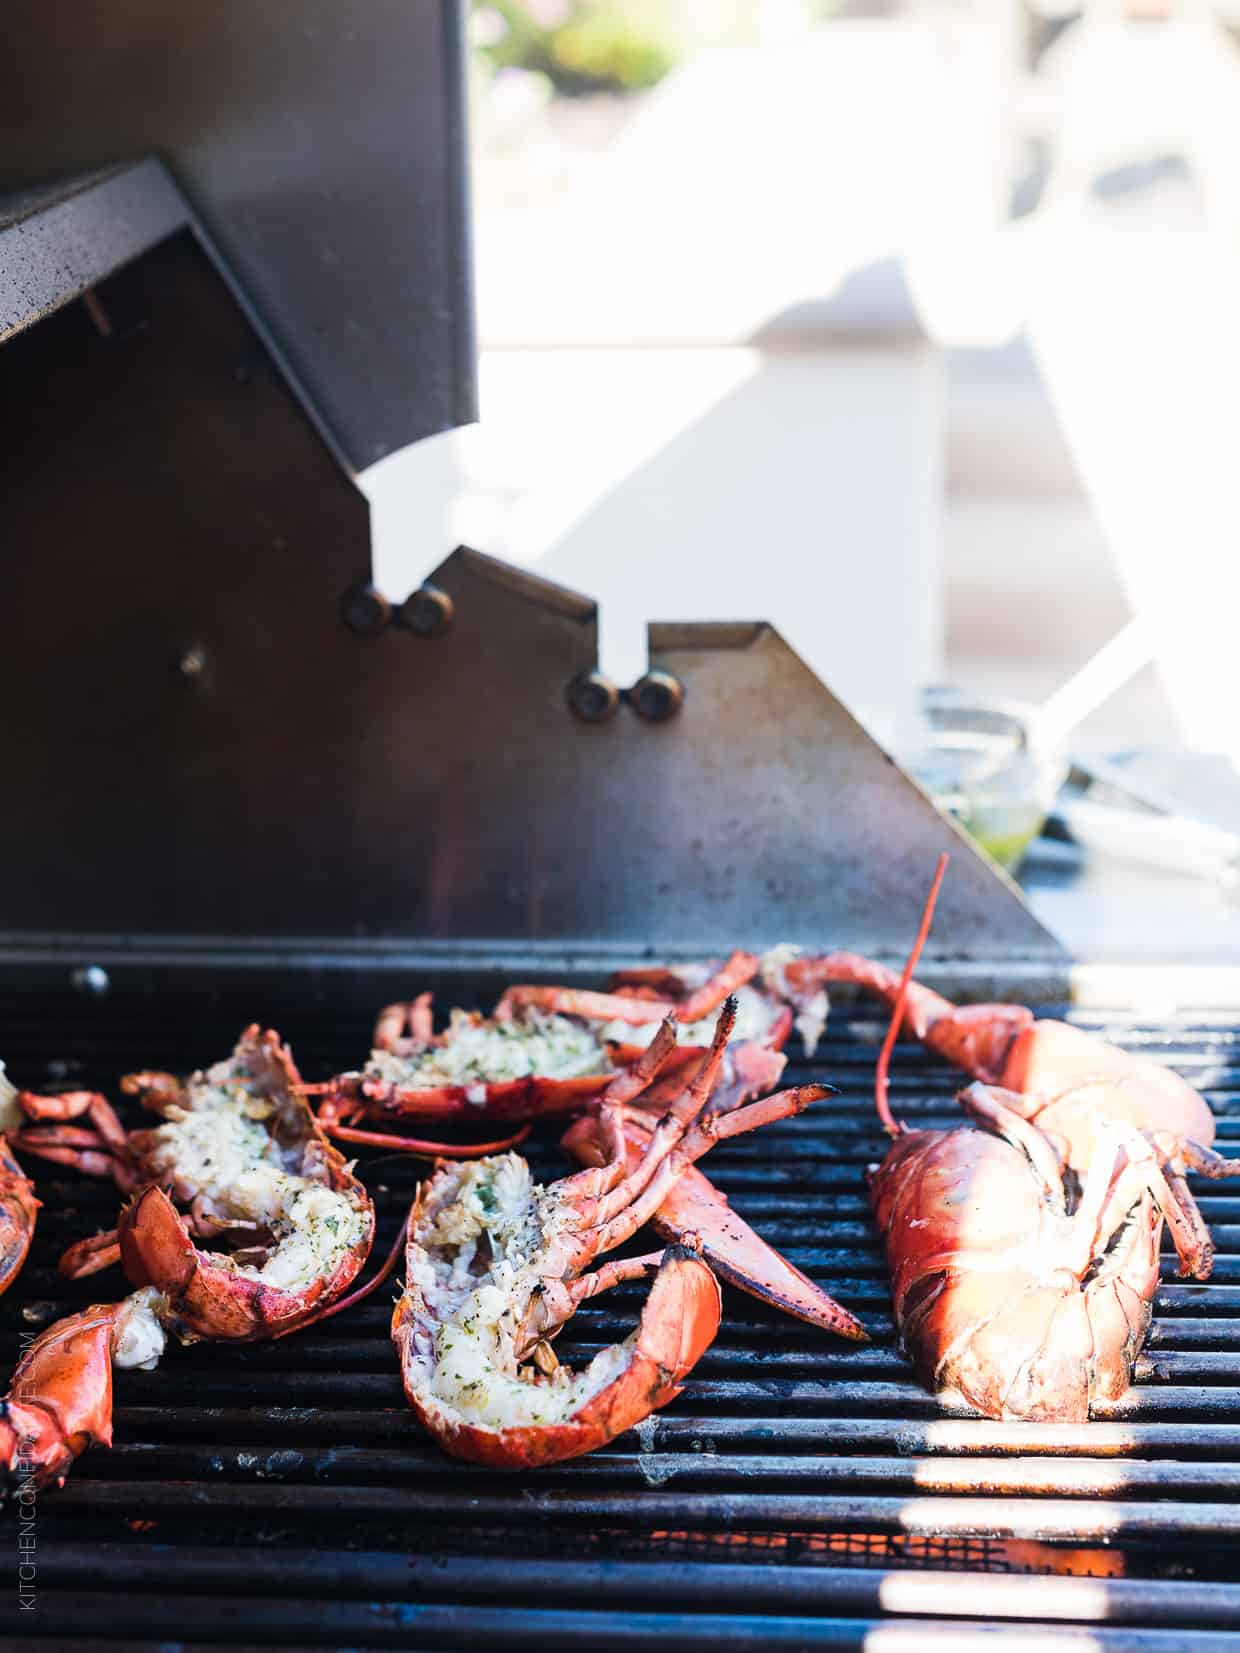 Grilled Chimichurri Lobster and Chimichurri Potato Salad is the easiest feast to come off the grill! A simple chimichurri made with good olive oil and red wine vinegar adds zing to grilled lobster and an herbed potato salad. Try it for your next barbecue!